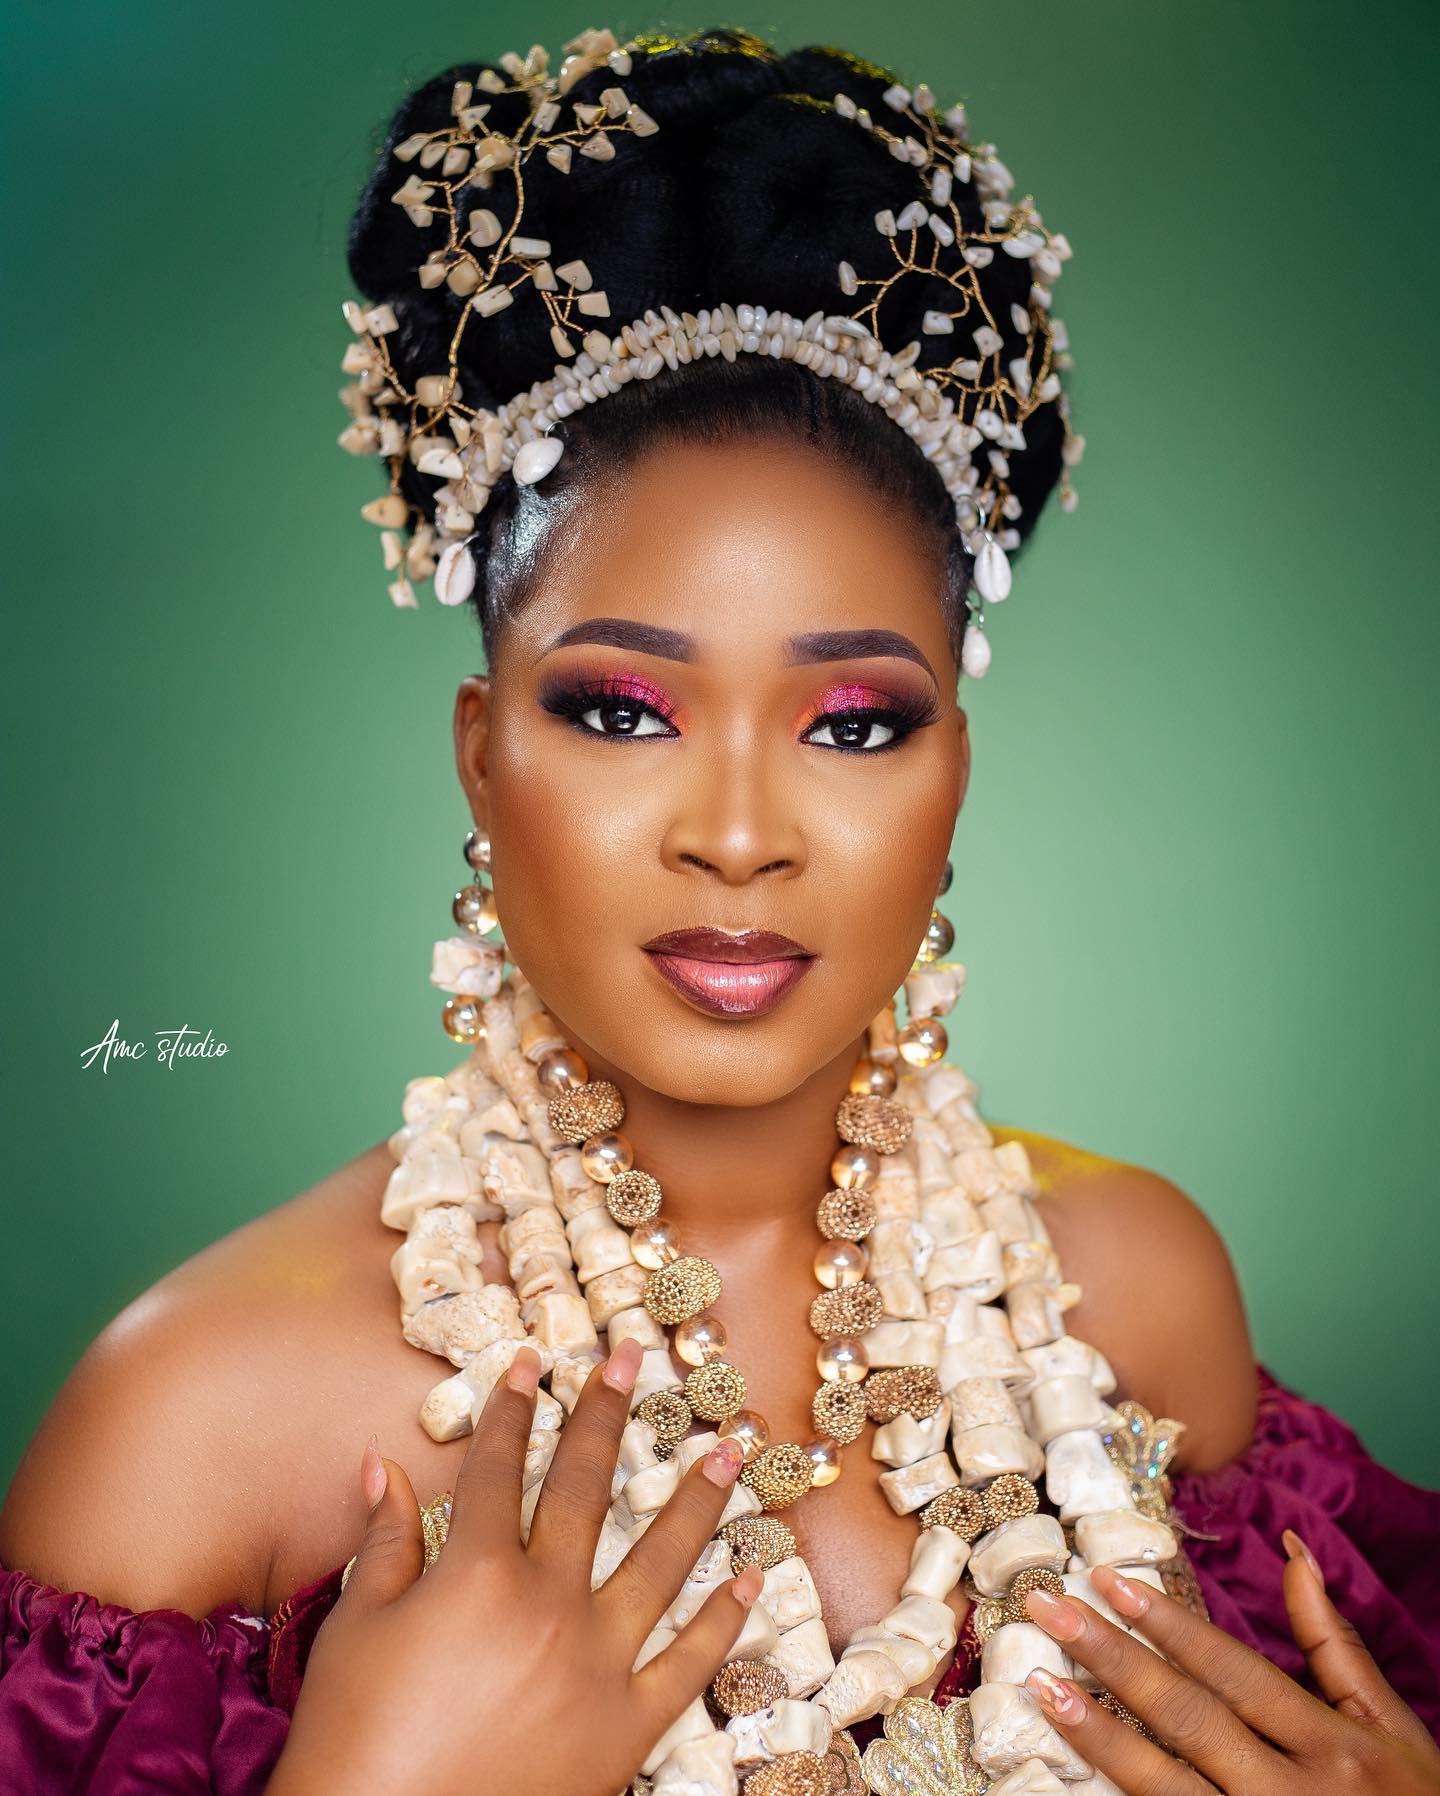 This Igbo Bridal Beauty Look Is Simply Stunning